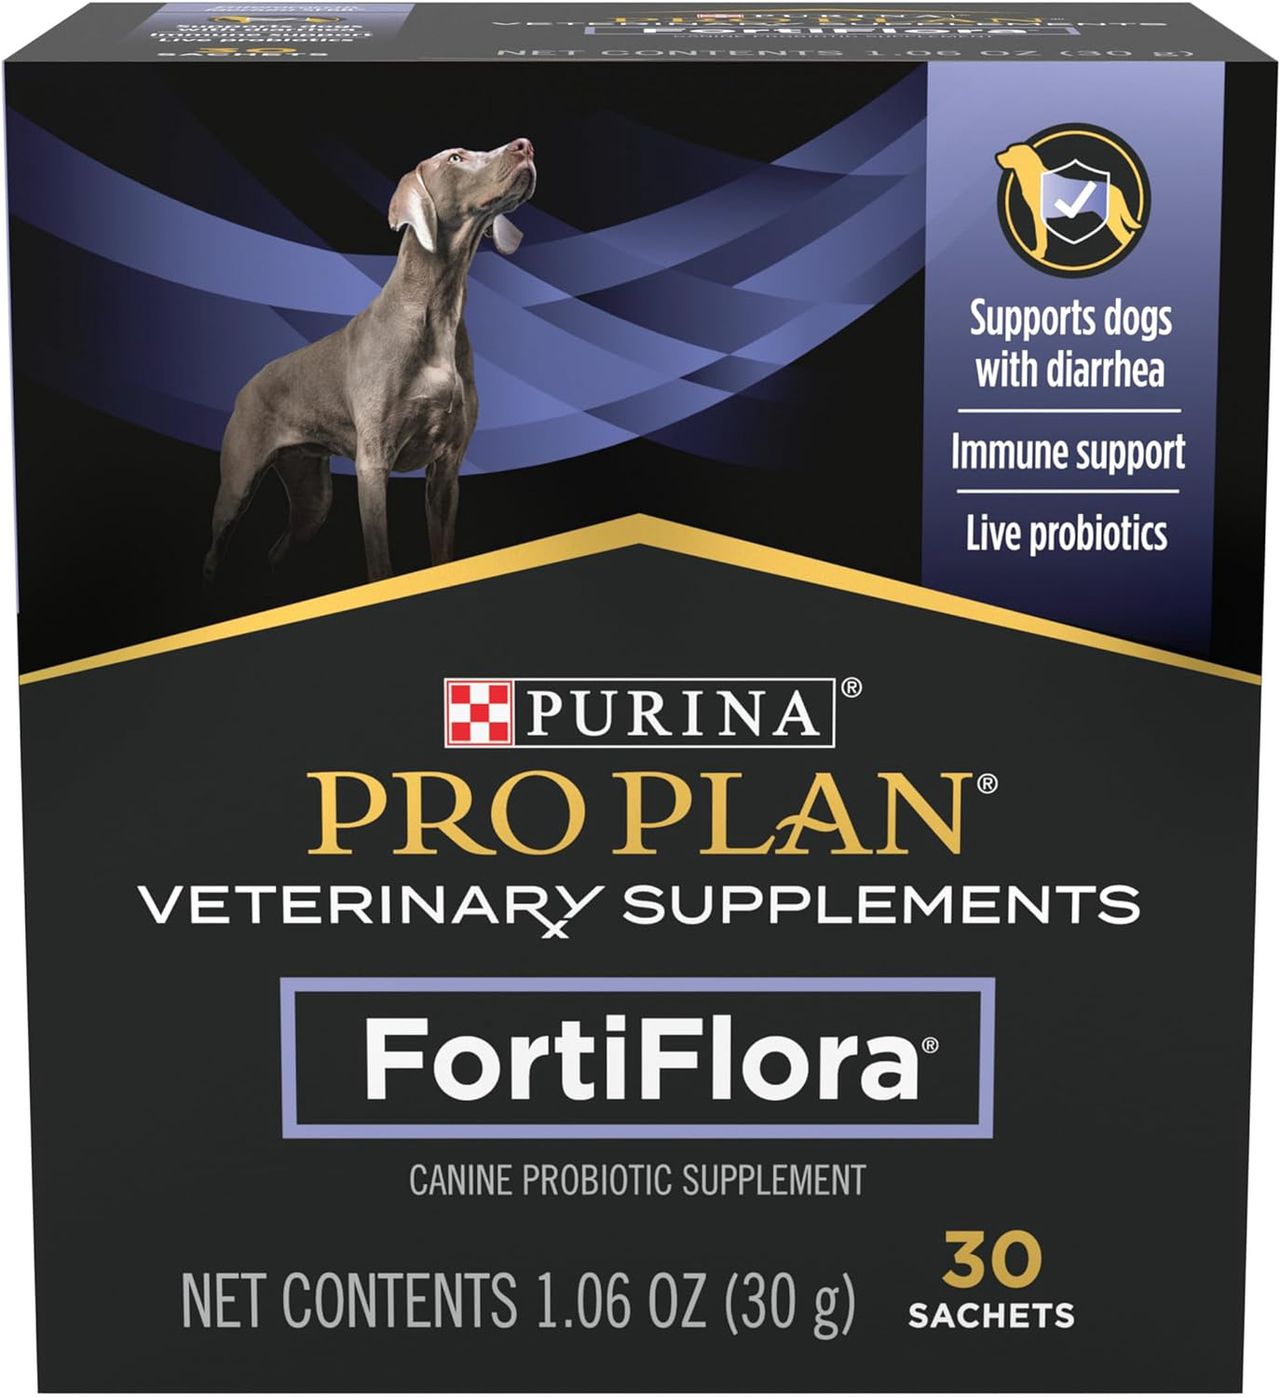 Dietary supplements for dogs